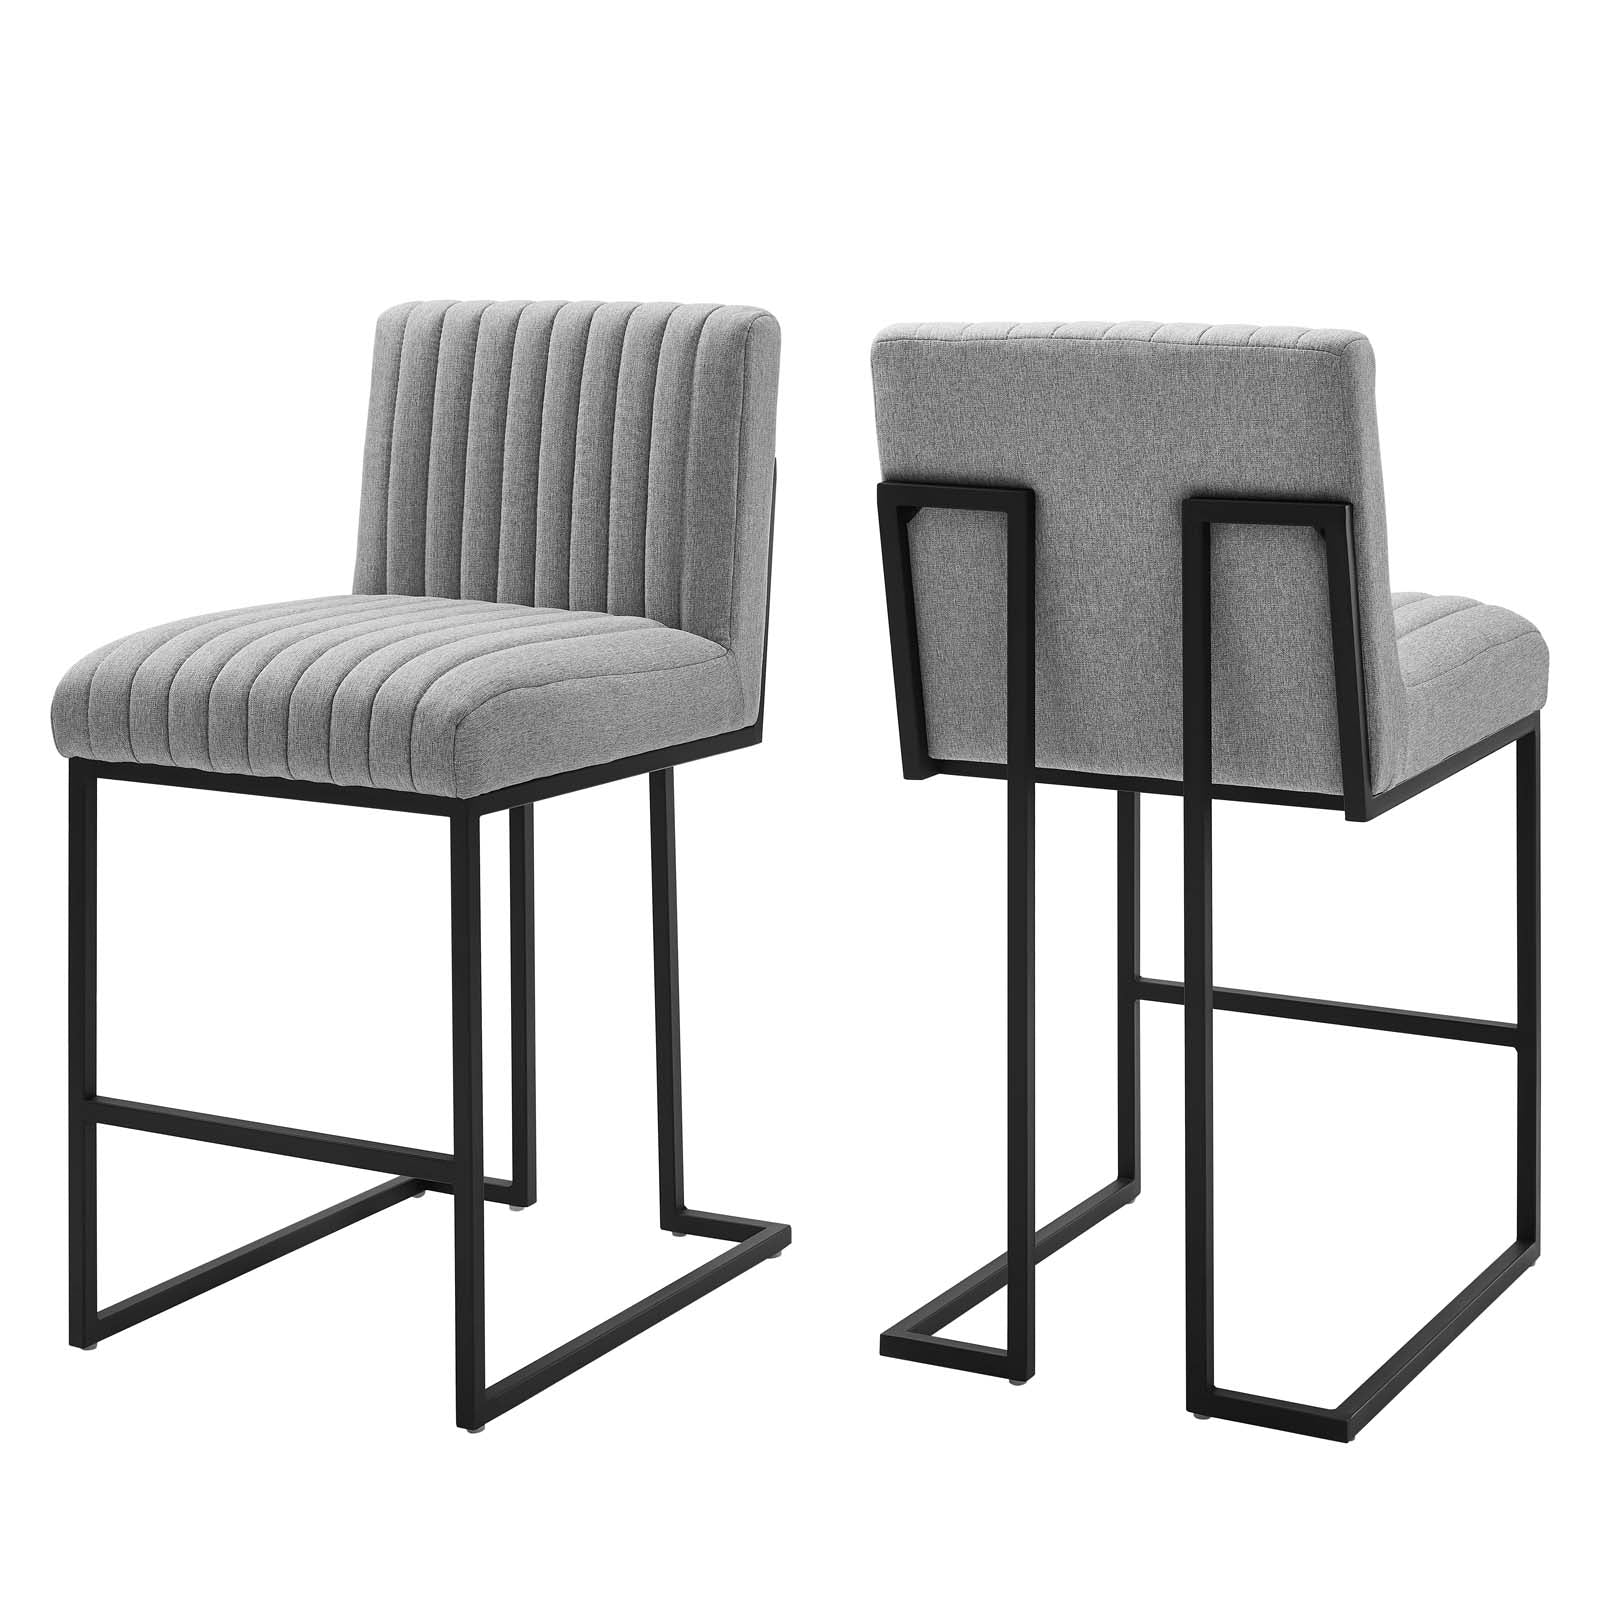 Modway Barstools - Indulge Channel Tufted Fabric Counter Stools Set Of 2 Light Gray